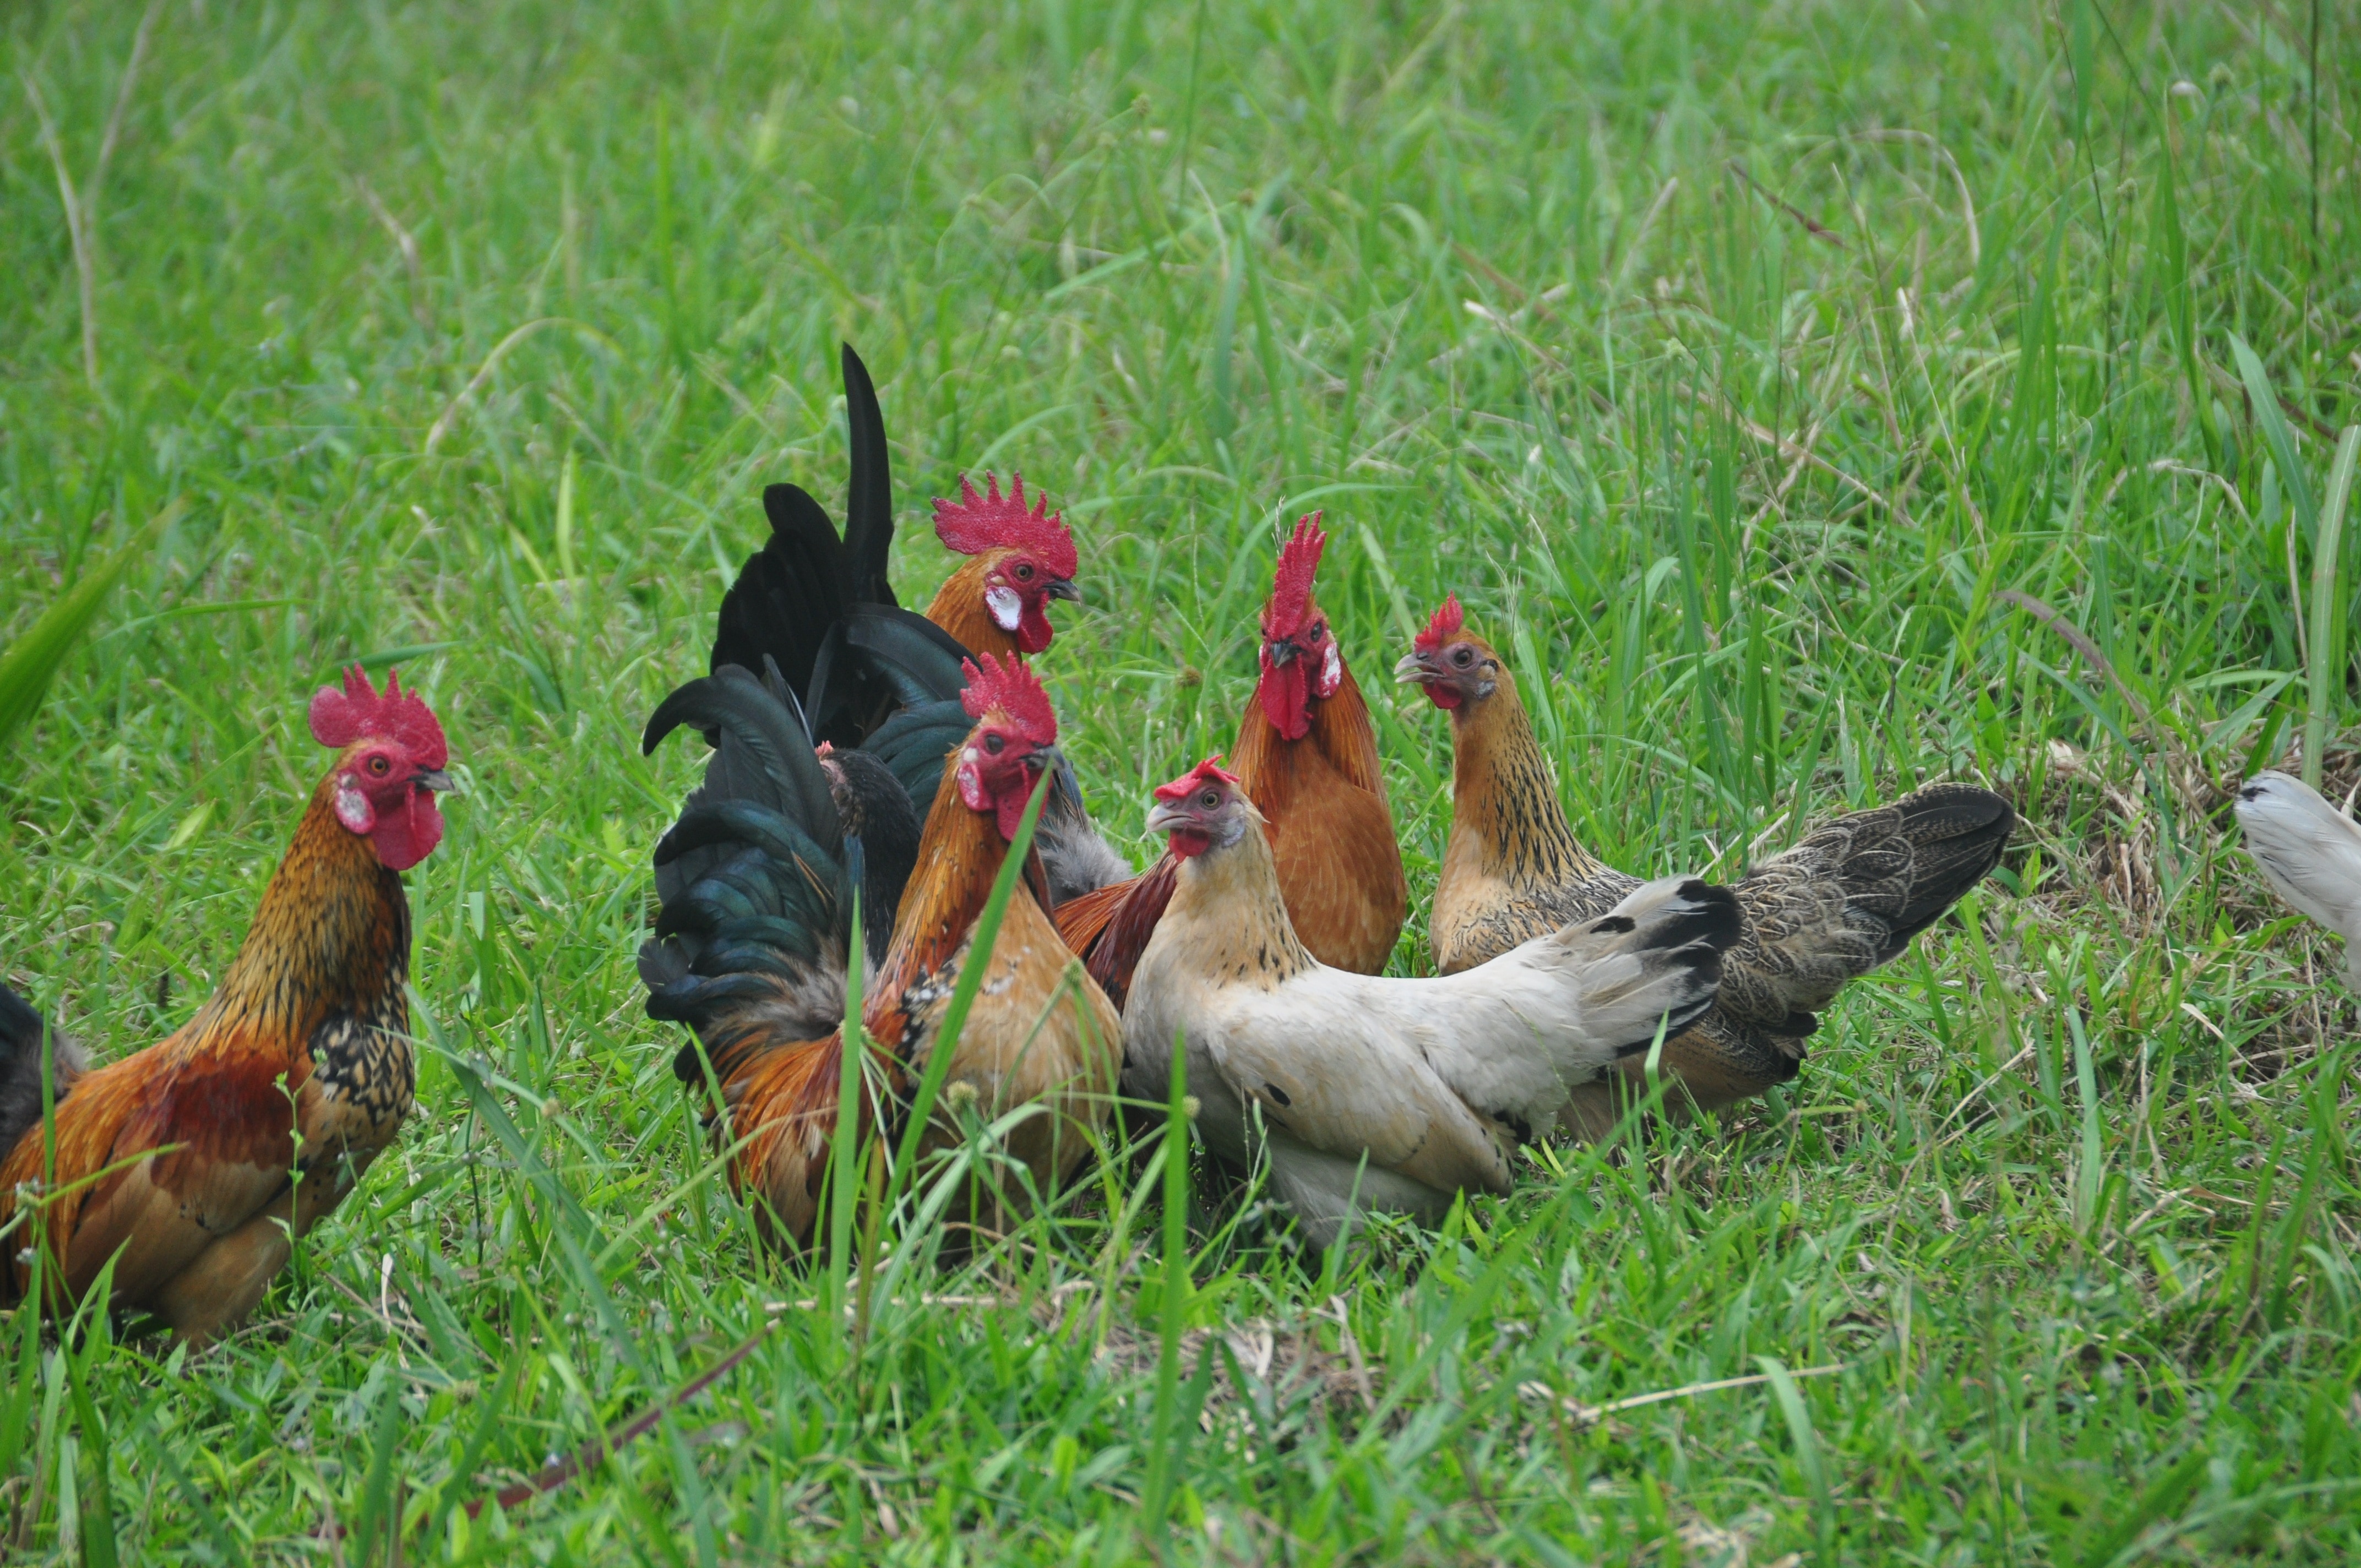 group of chicken in the grass field during day time